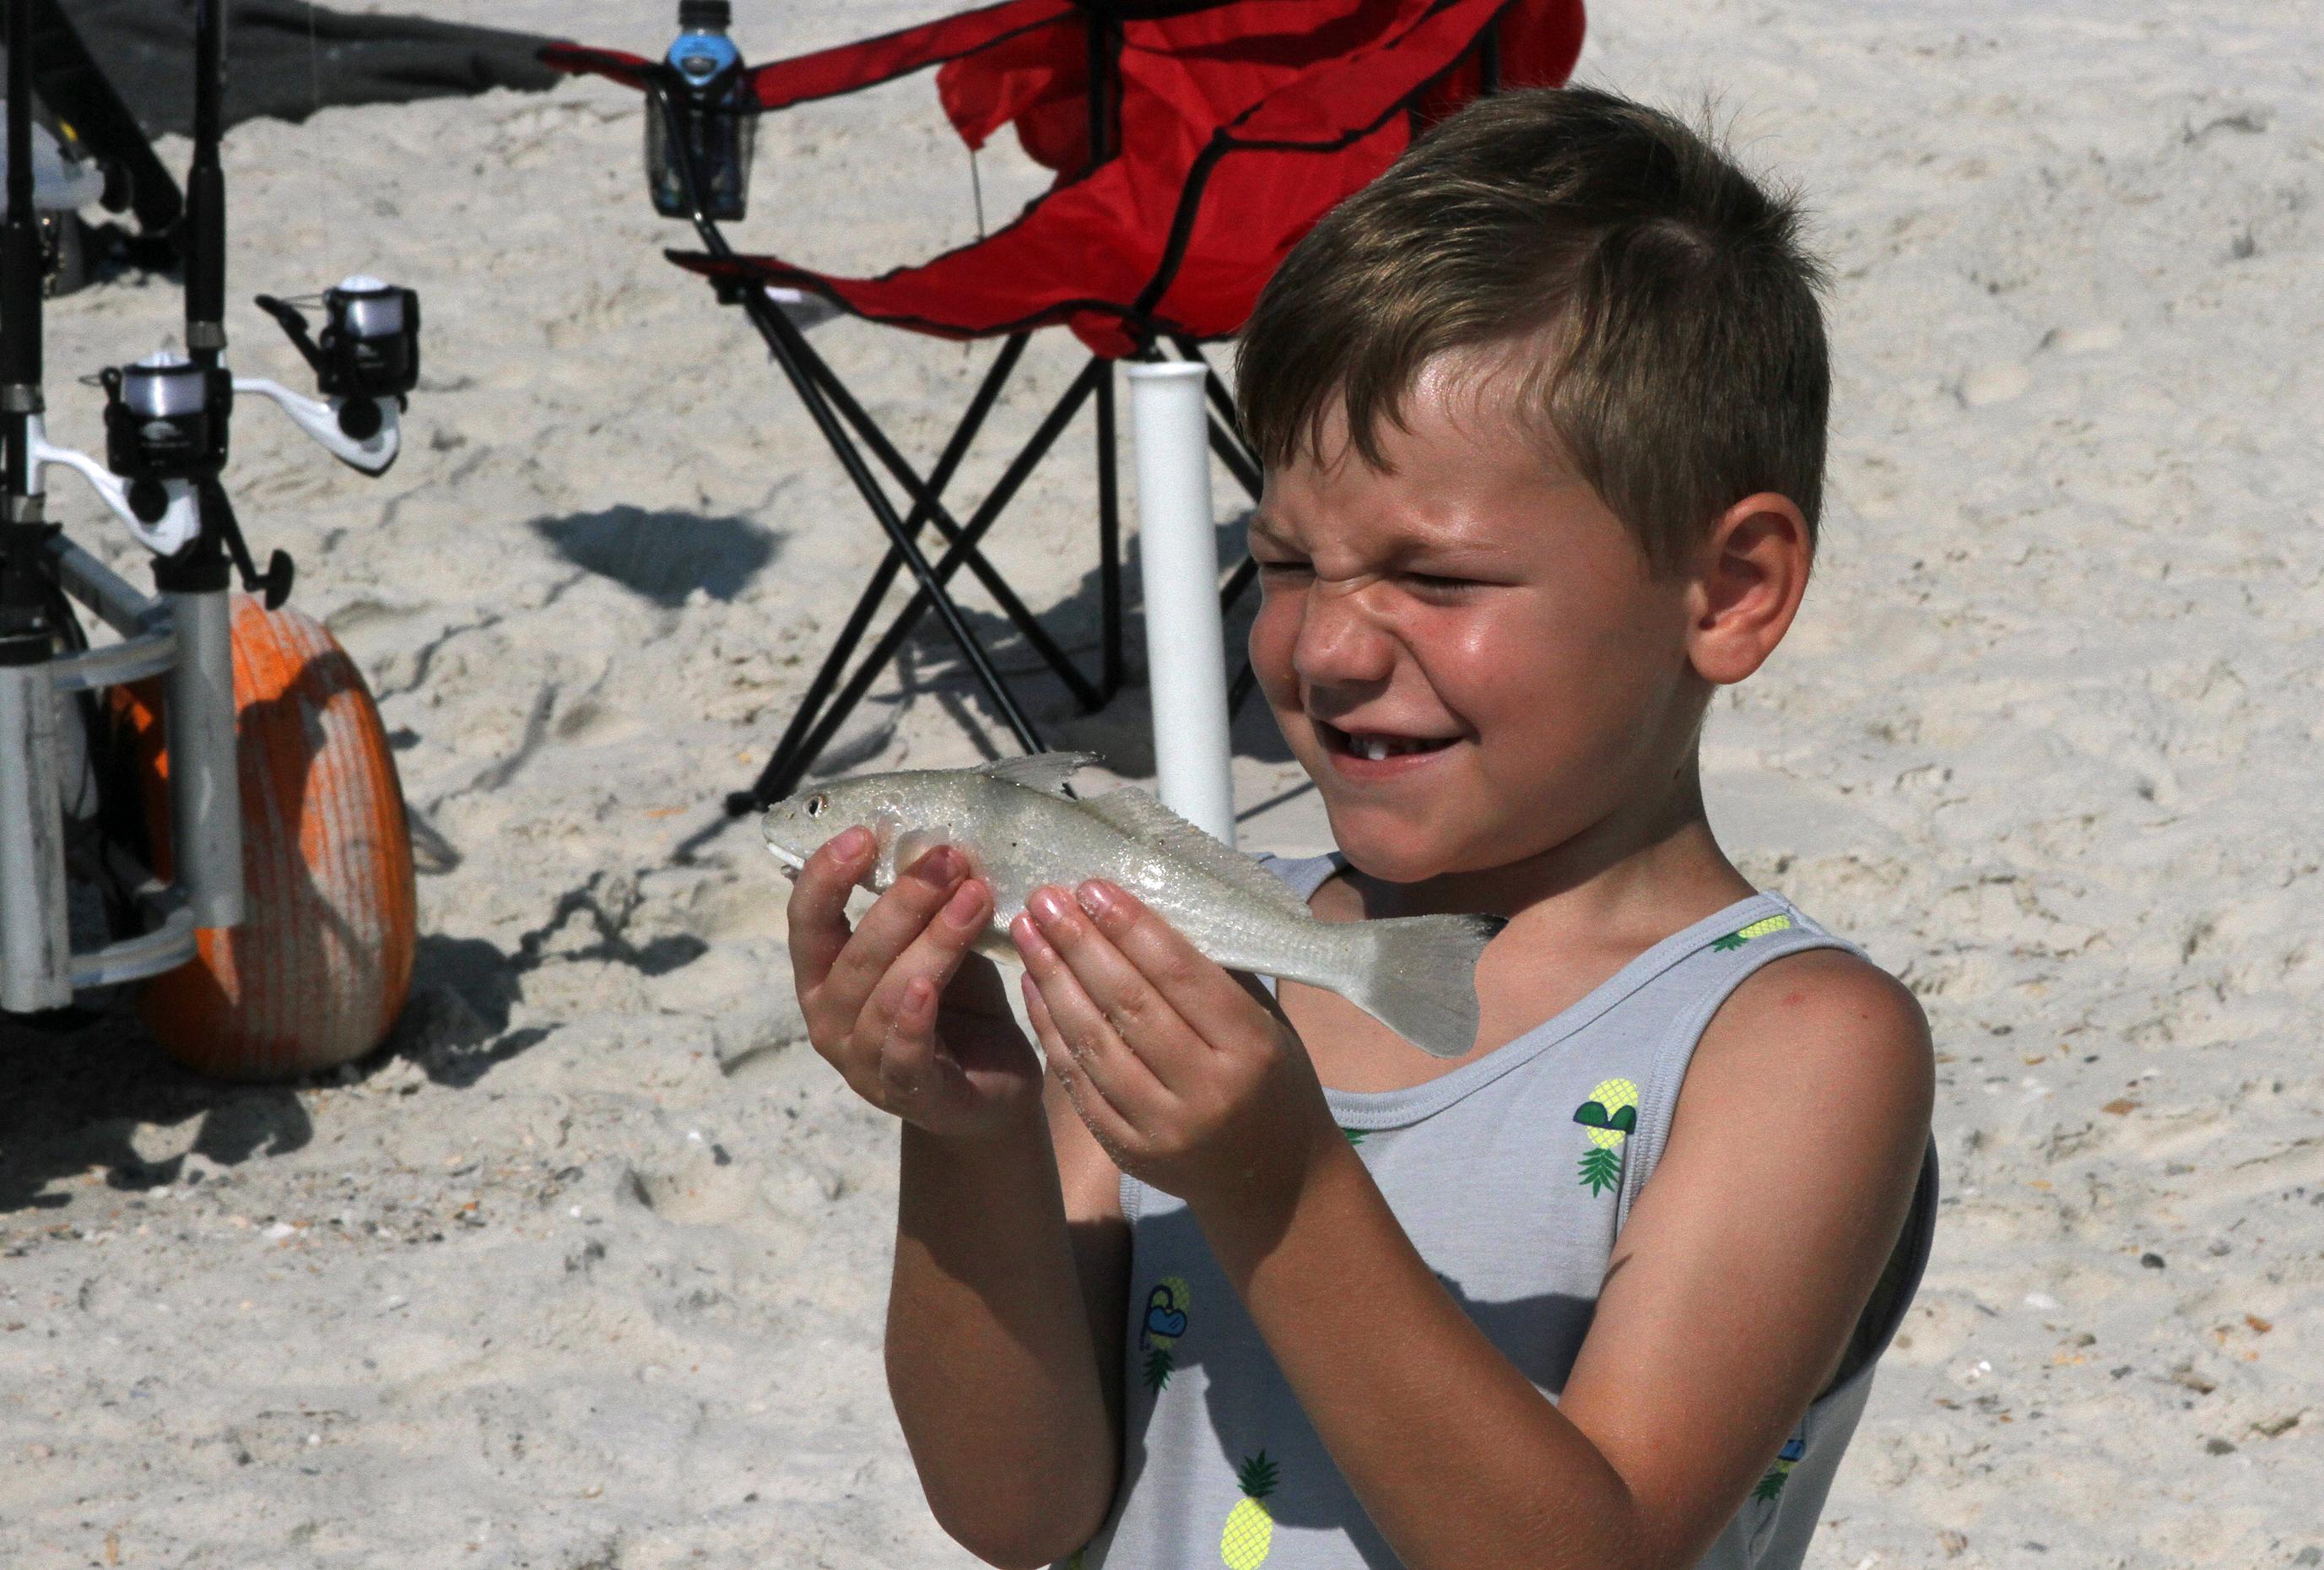 Kids Learn to Surf Fish at Gulf State Park